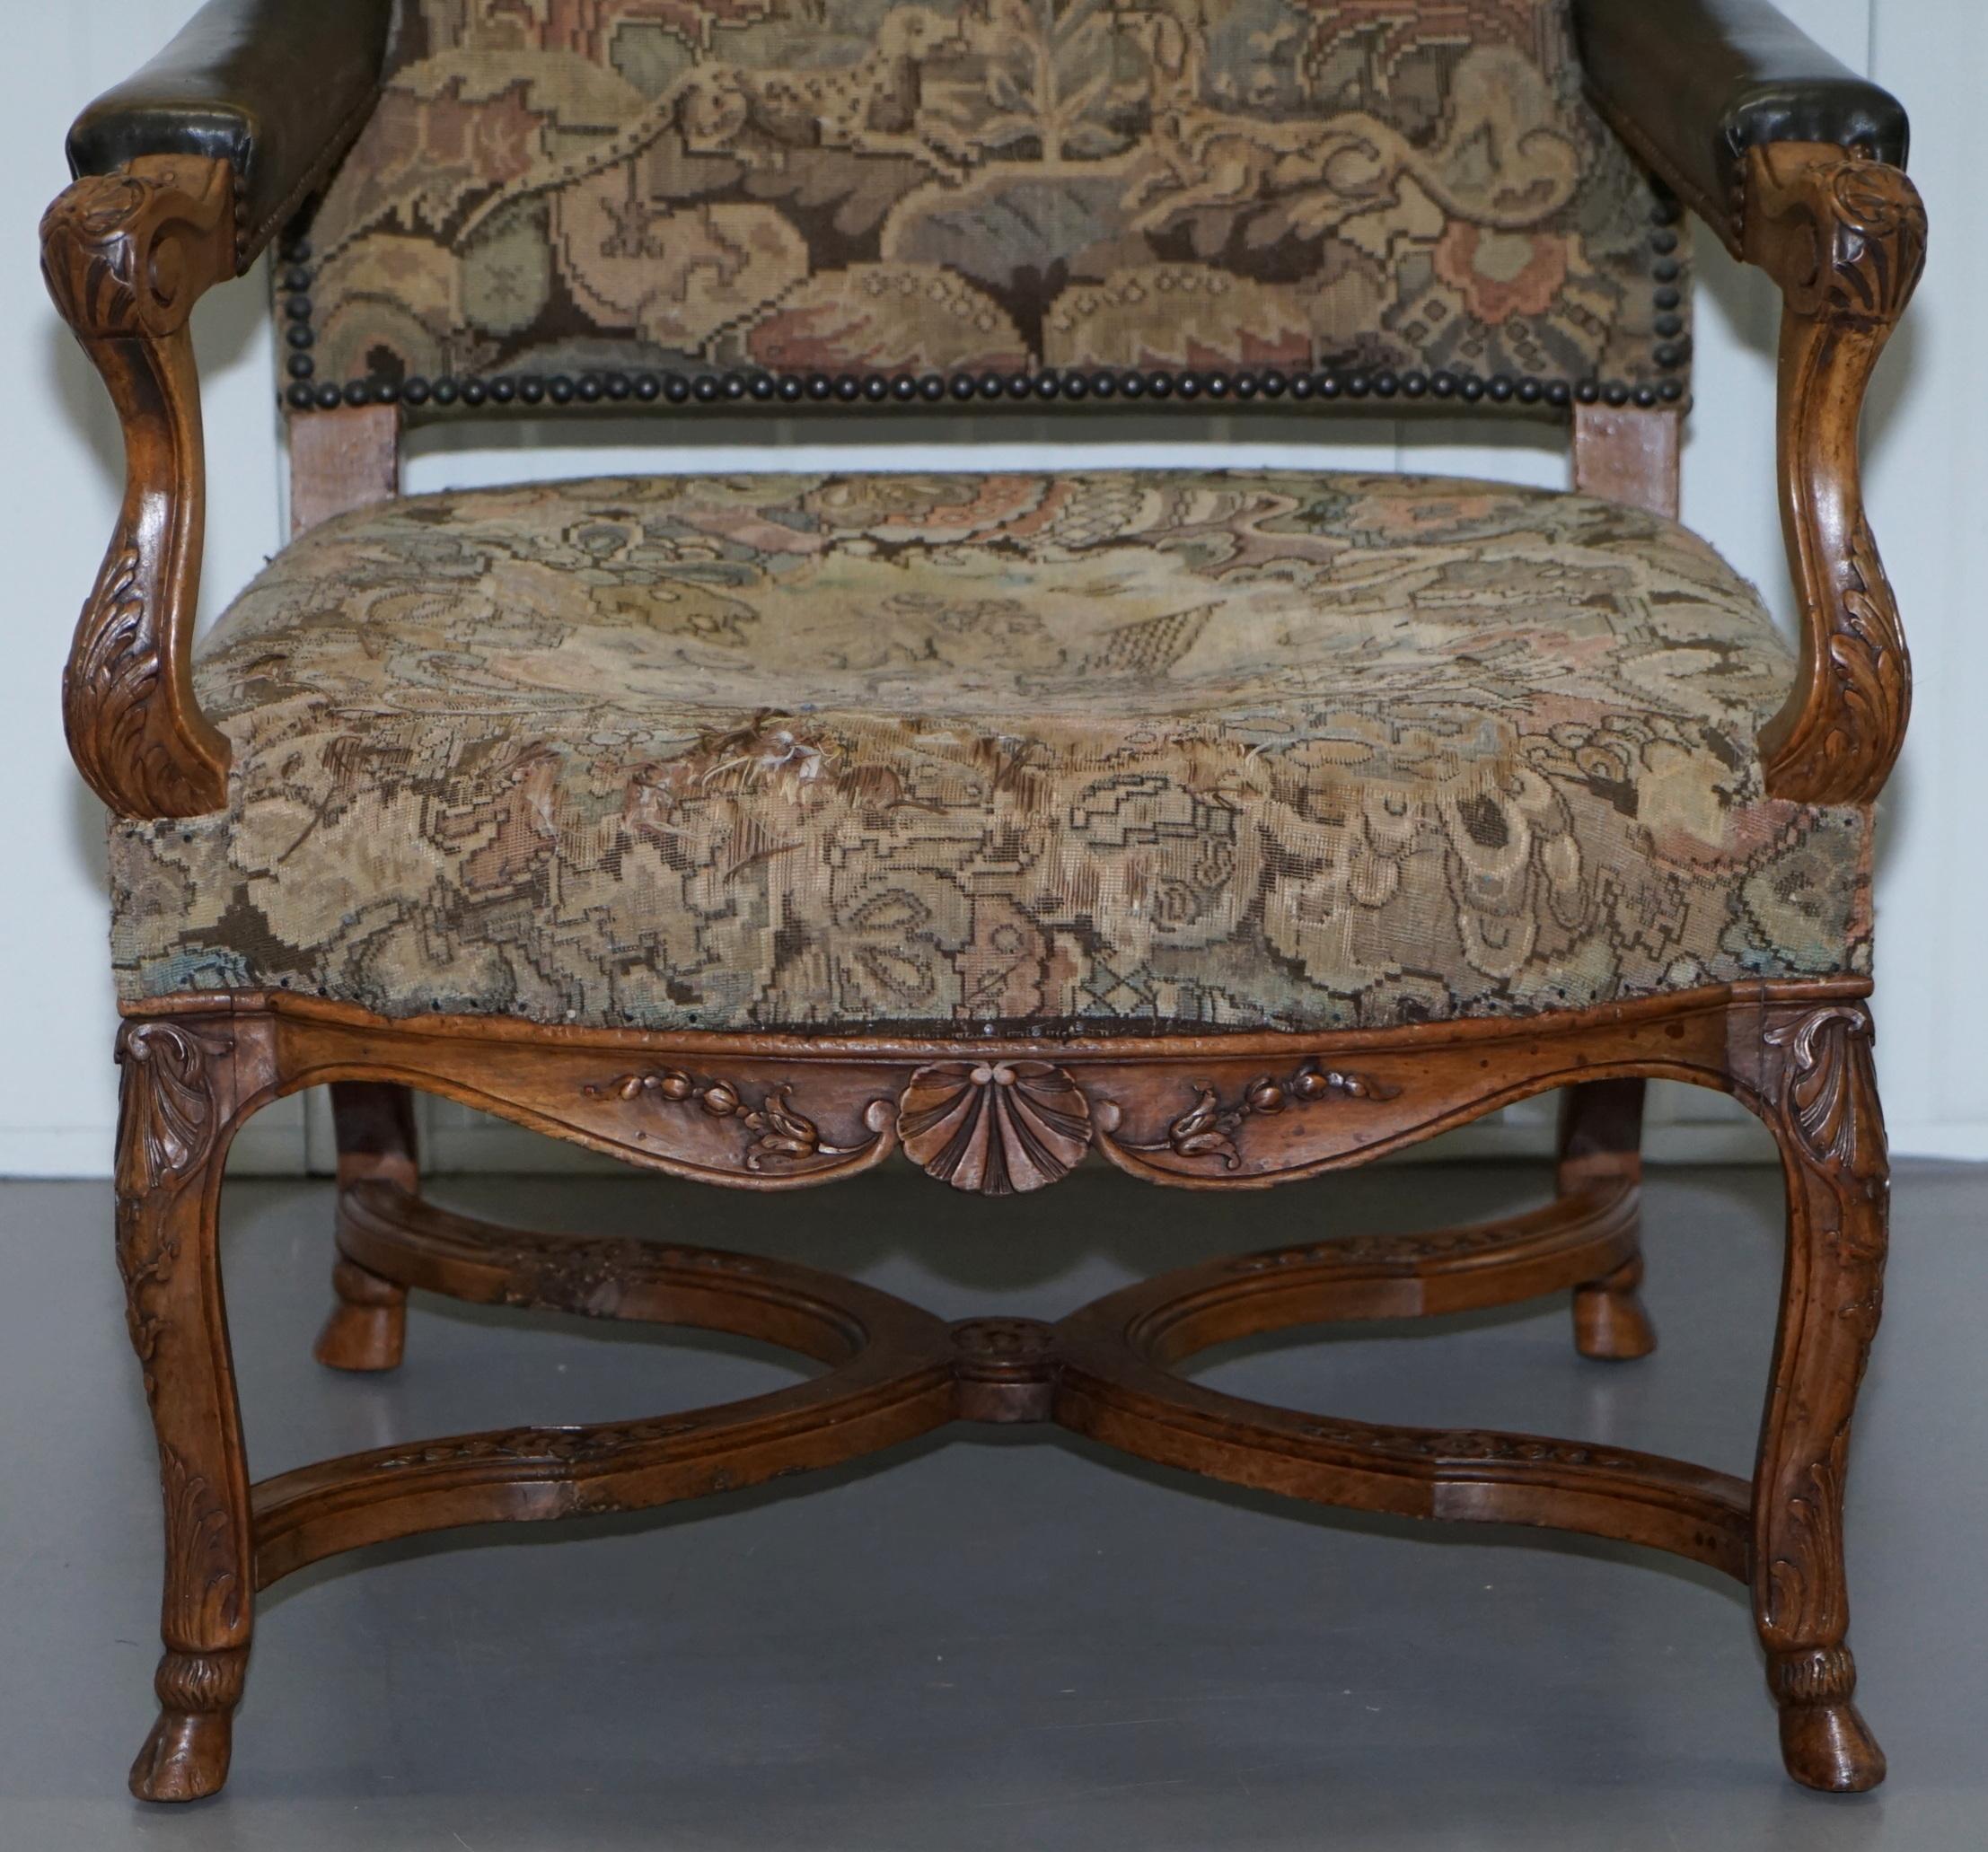 Rare 19th Century French Embroidered Armchair Ornately Carved Frame High Back For Sale 4